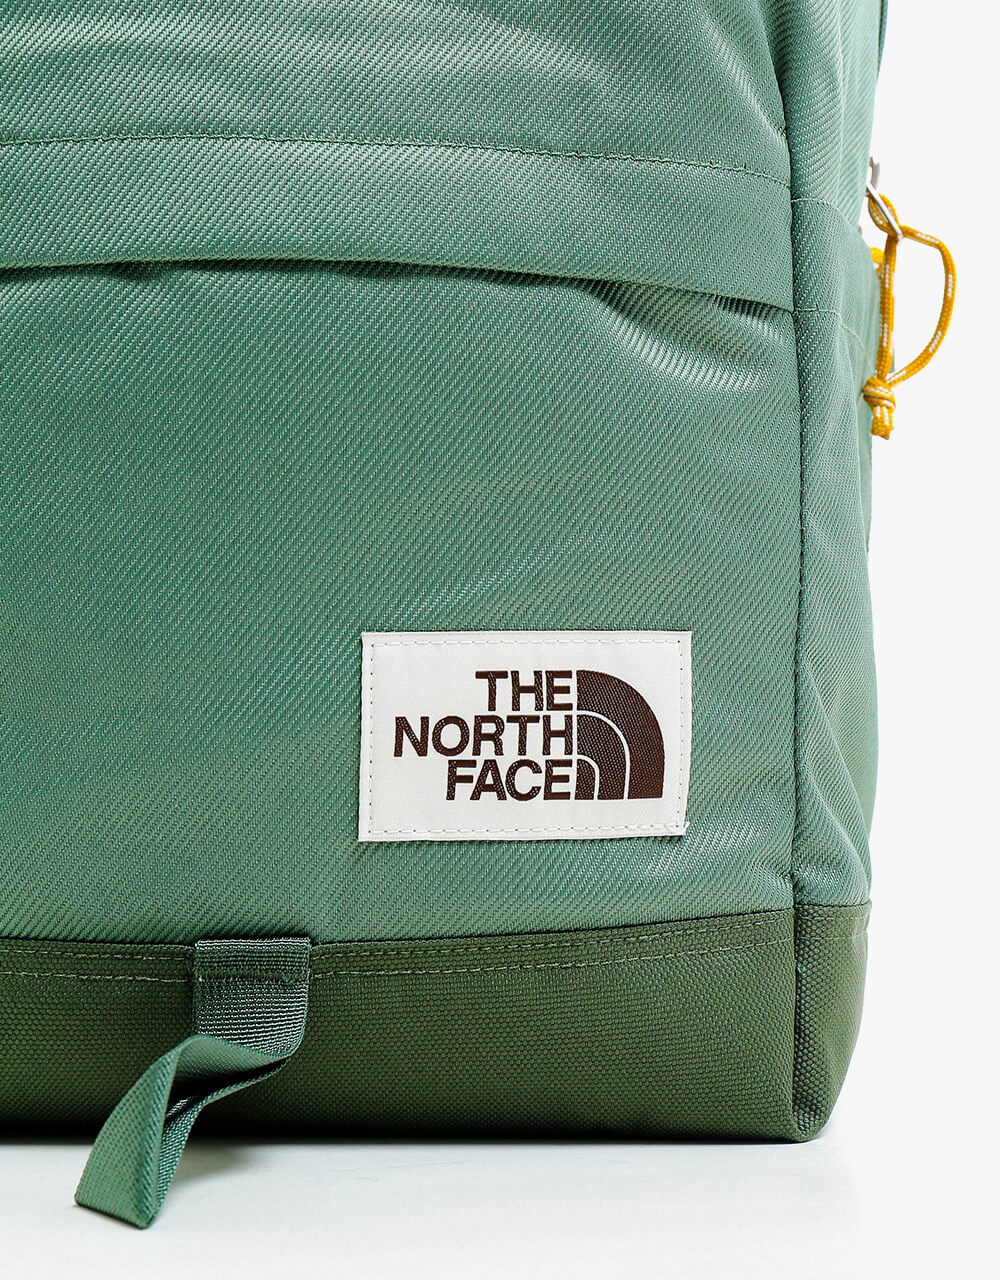 The North Face Daypack Backpack - Laurel Wreath Green/Thyme/Arrowwood